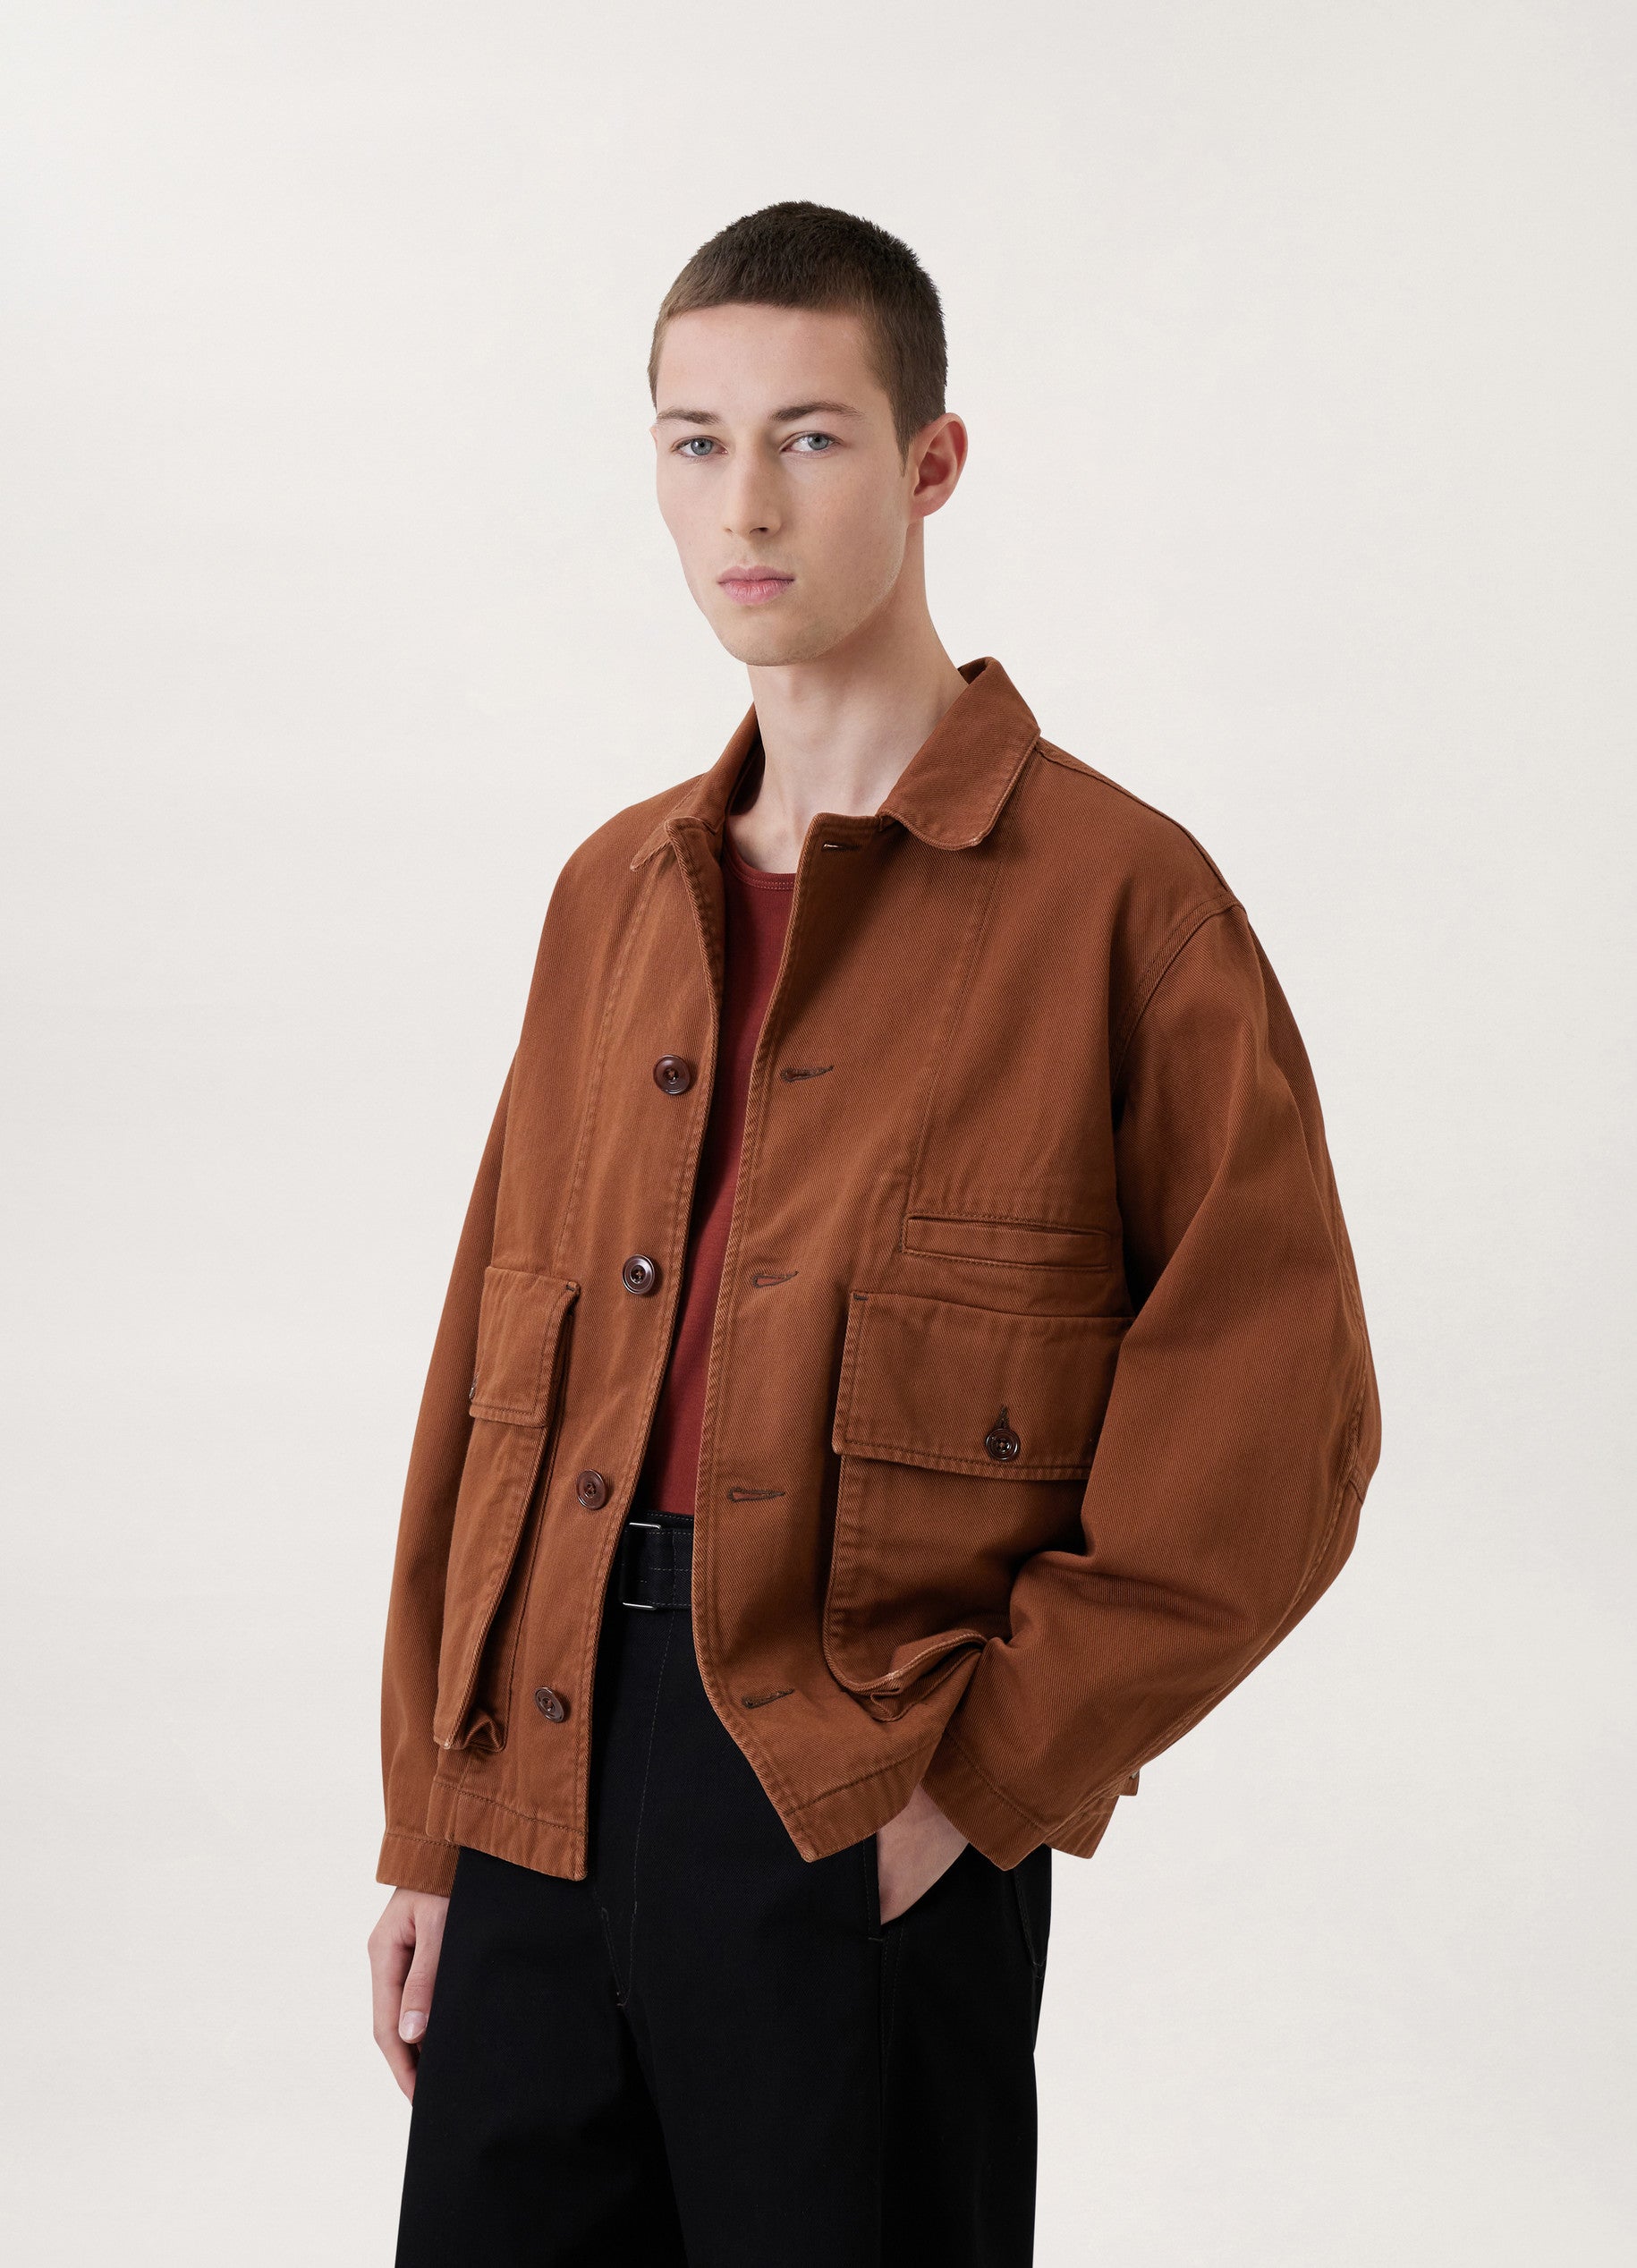 Boxy Jacket - Brick Brown | LEMAIRE - Lemaire-USA